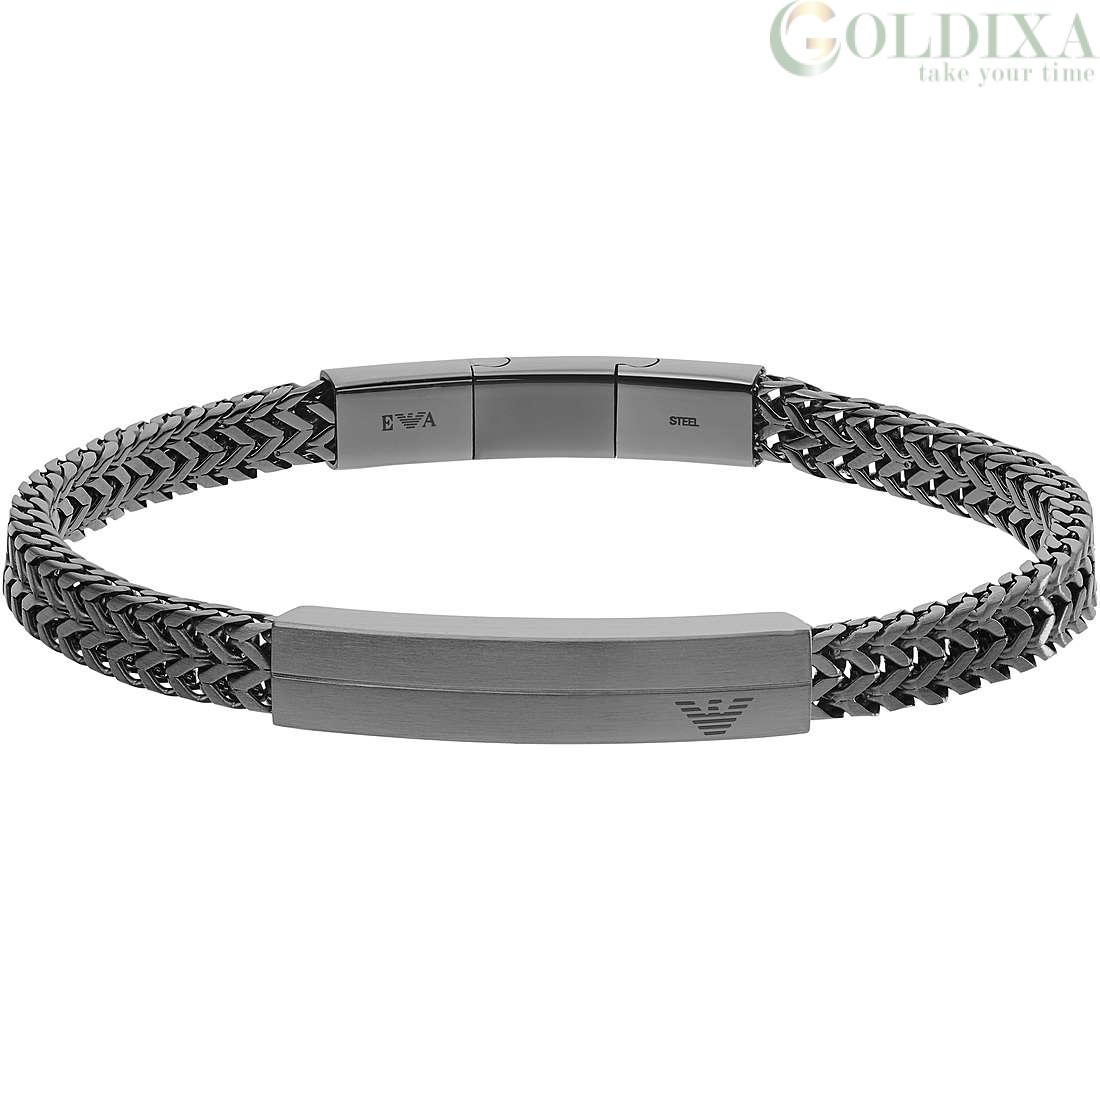 Stainless Steel Bangle Bracelet by Emporio Armani Men at ORCHARD MILE